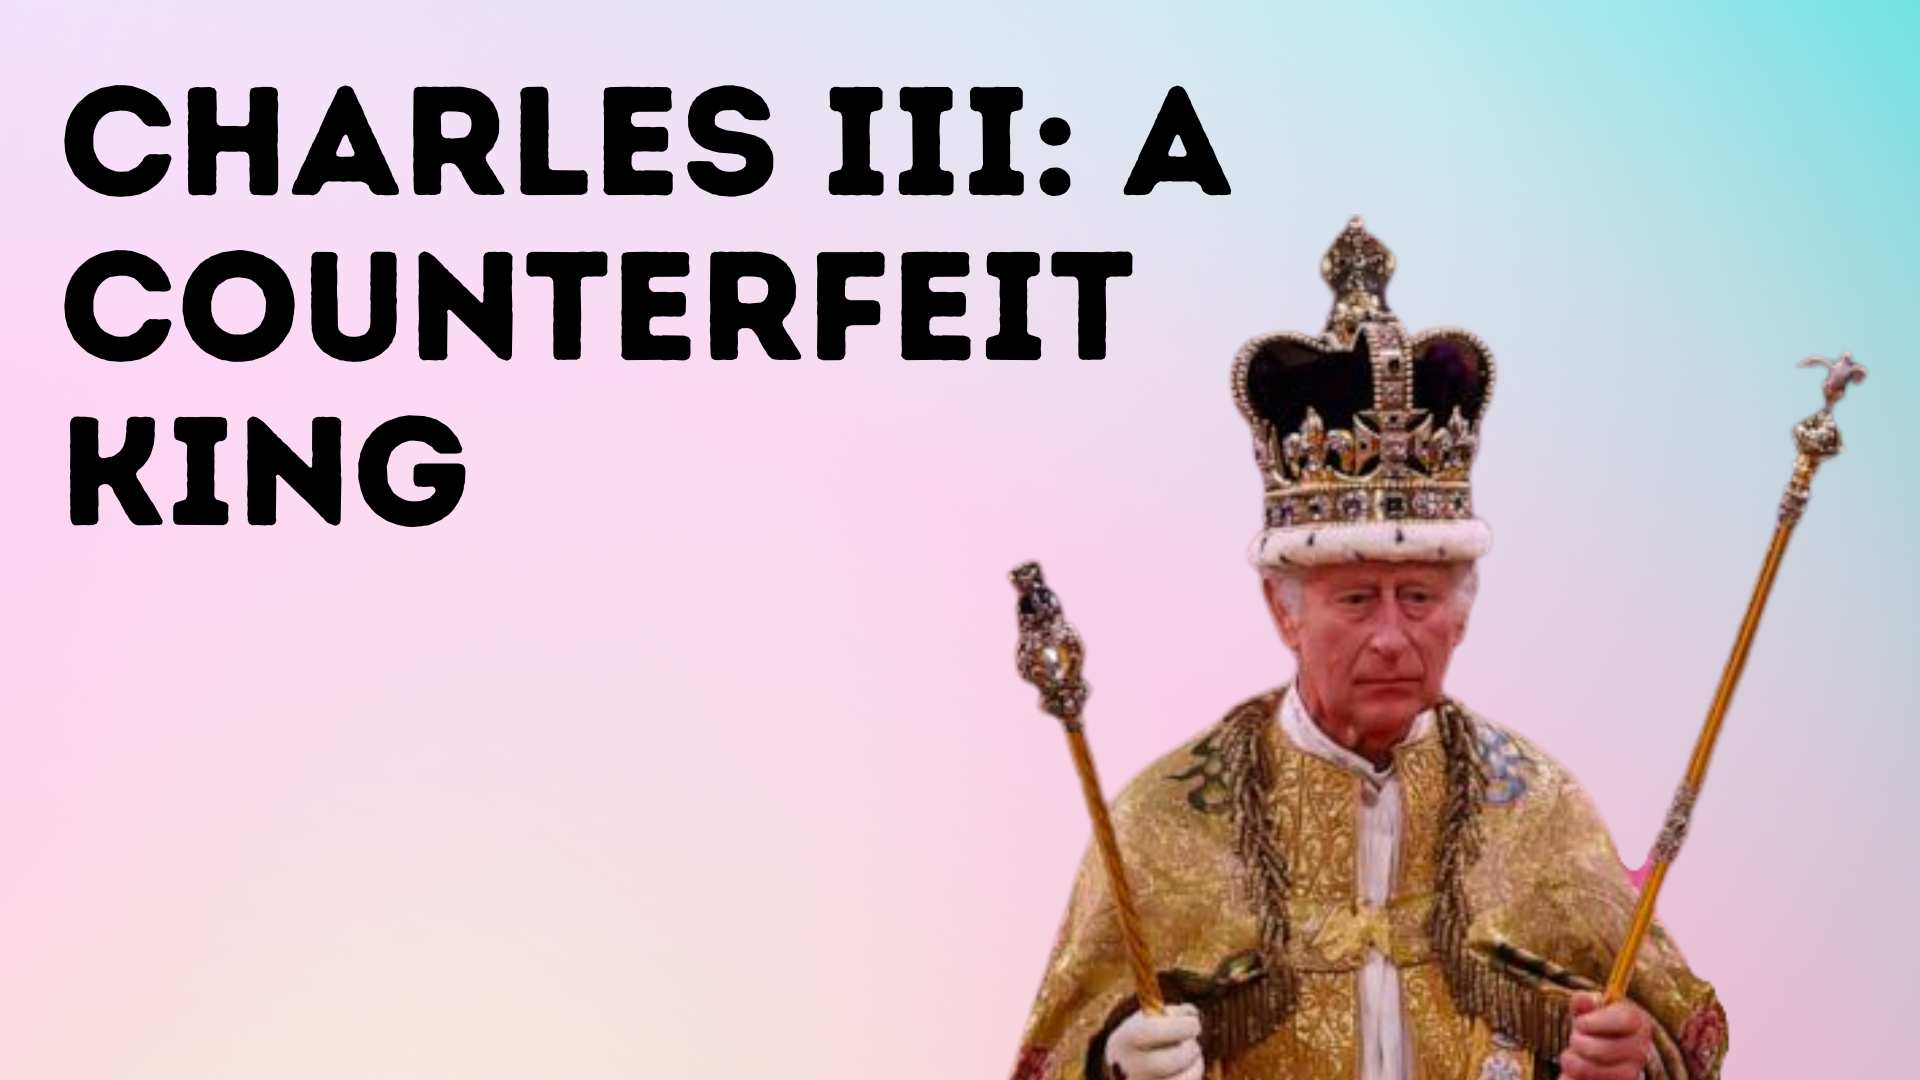 Charles III: A Counterfeit King